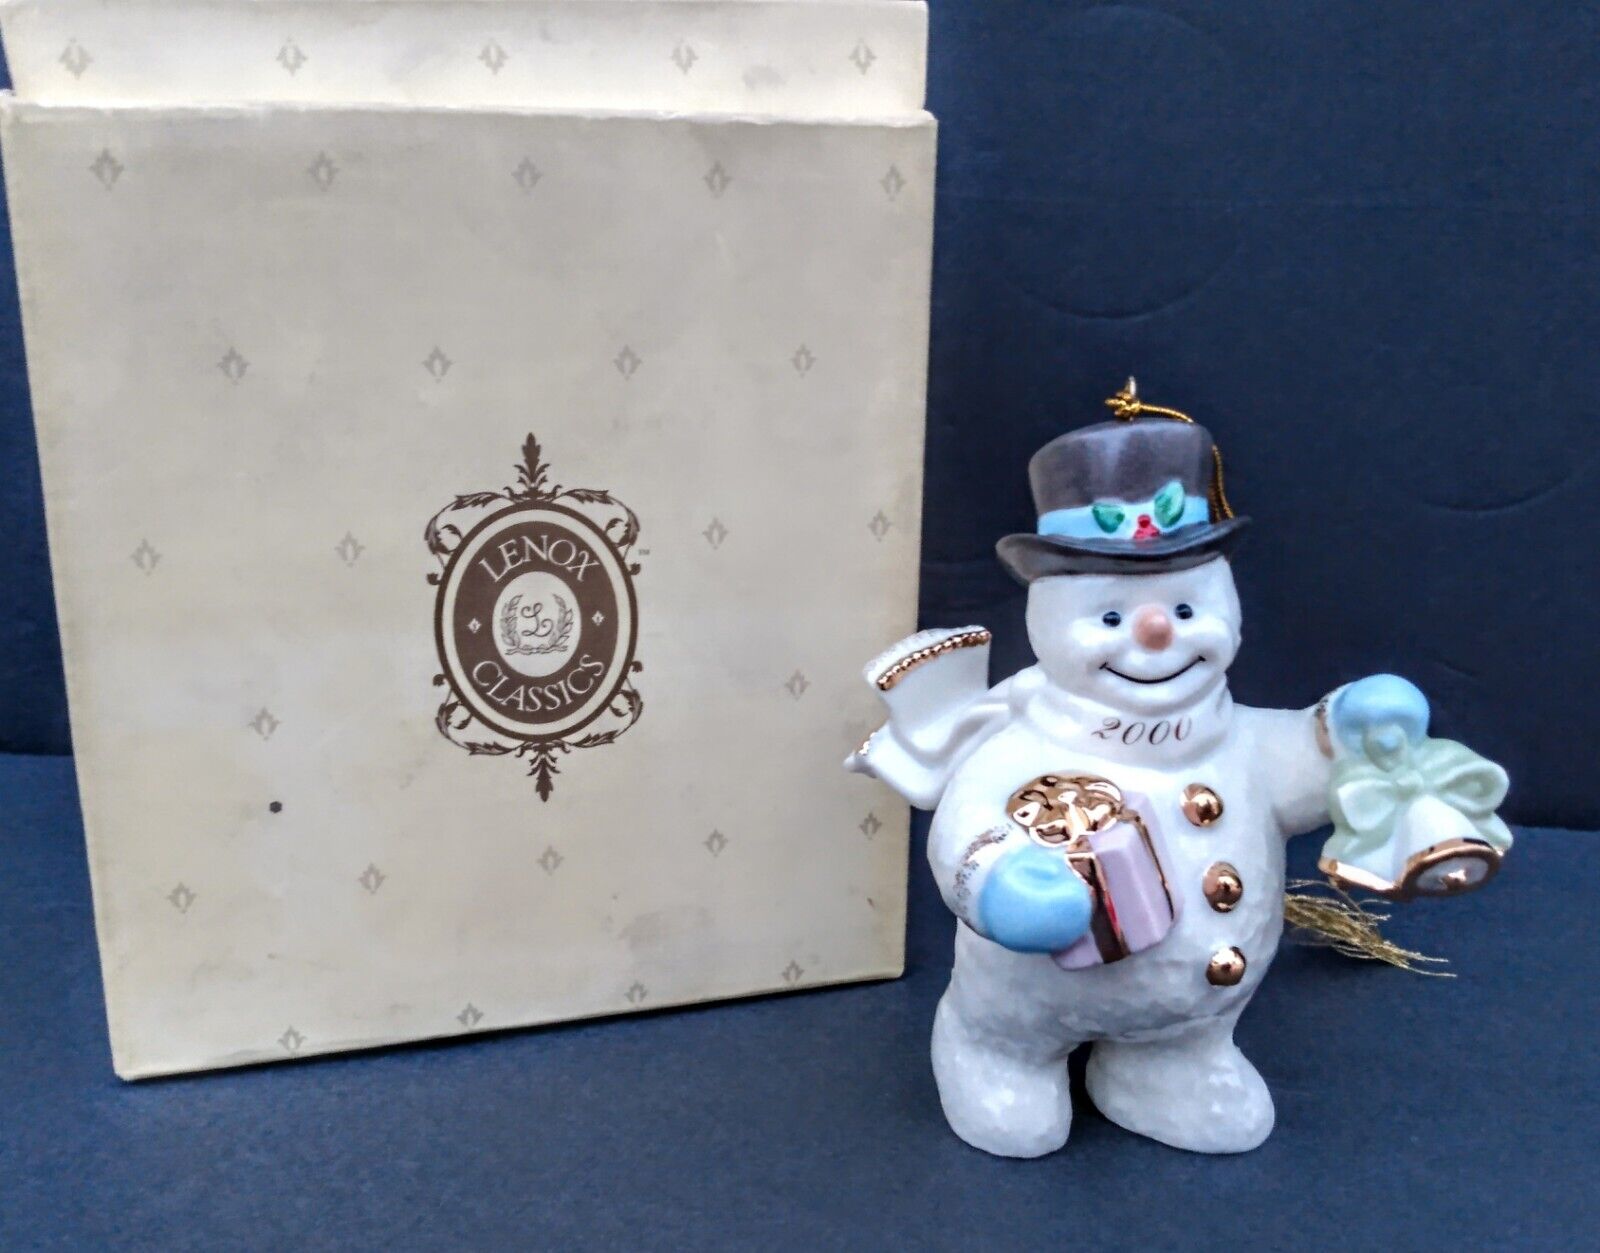 LENOX 2000 Annual SNOWMAN ORNAMENT Ringing In The New Year With Box